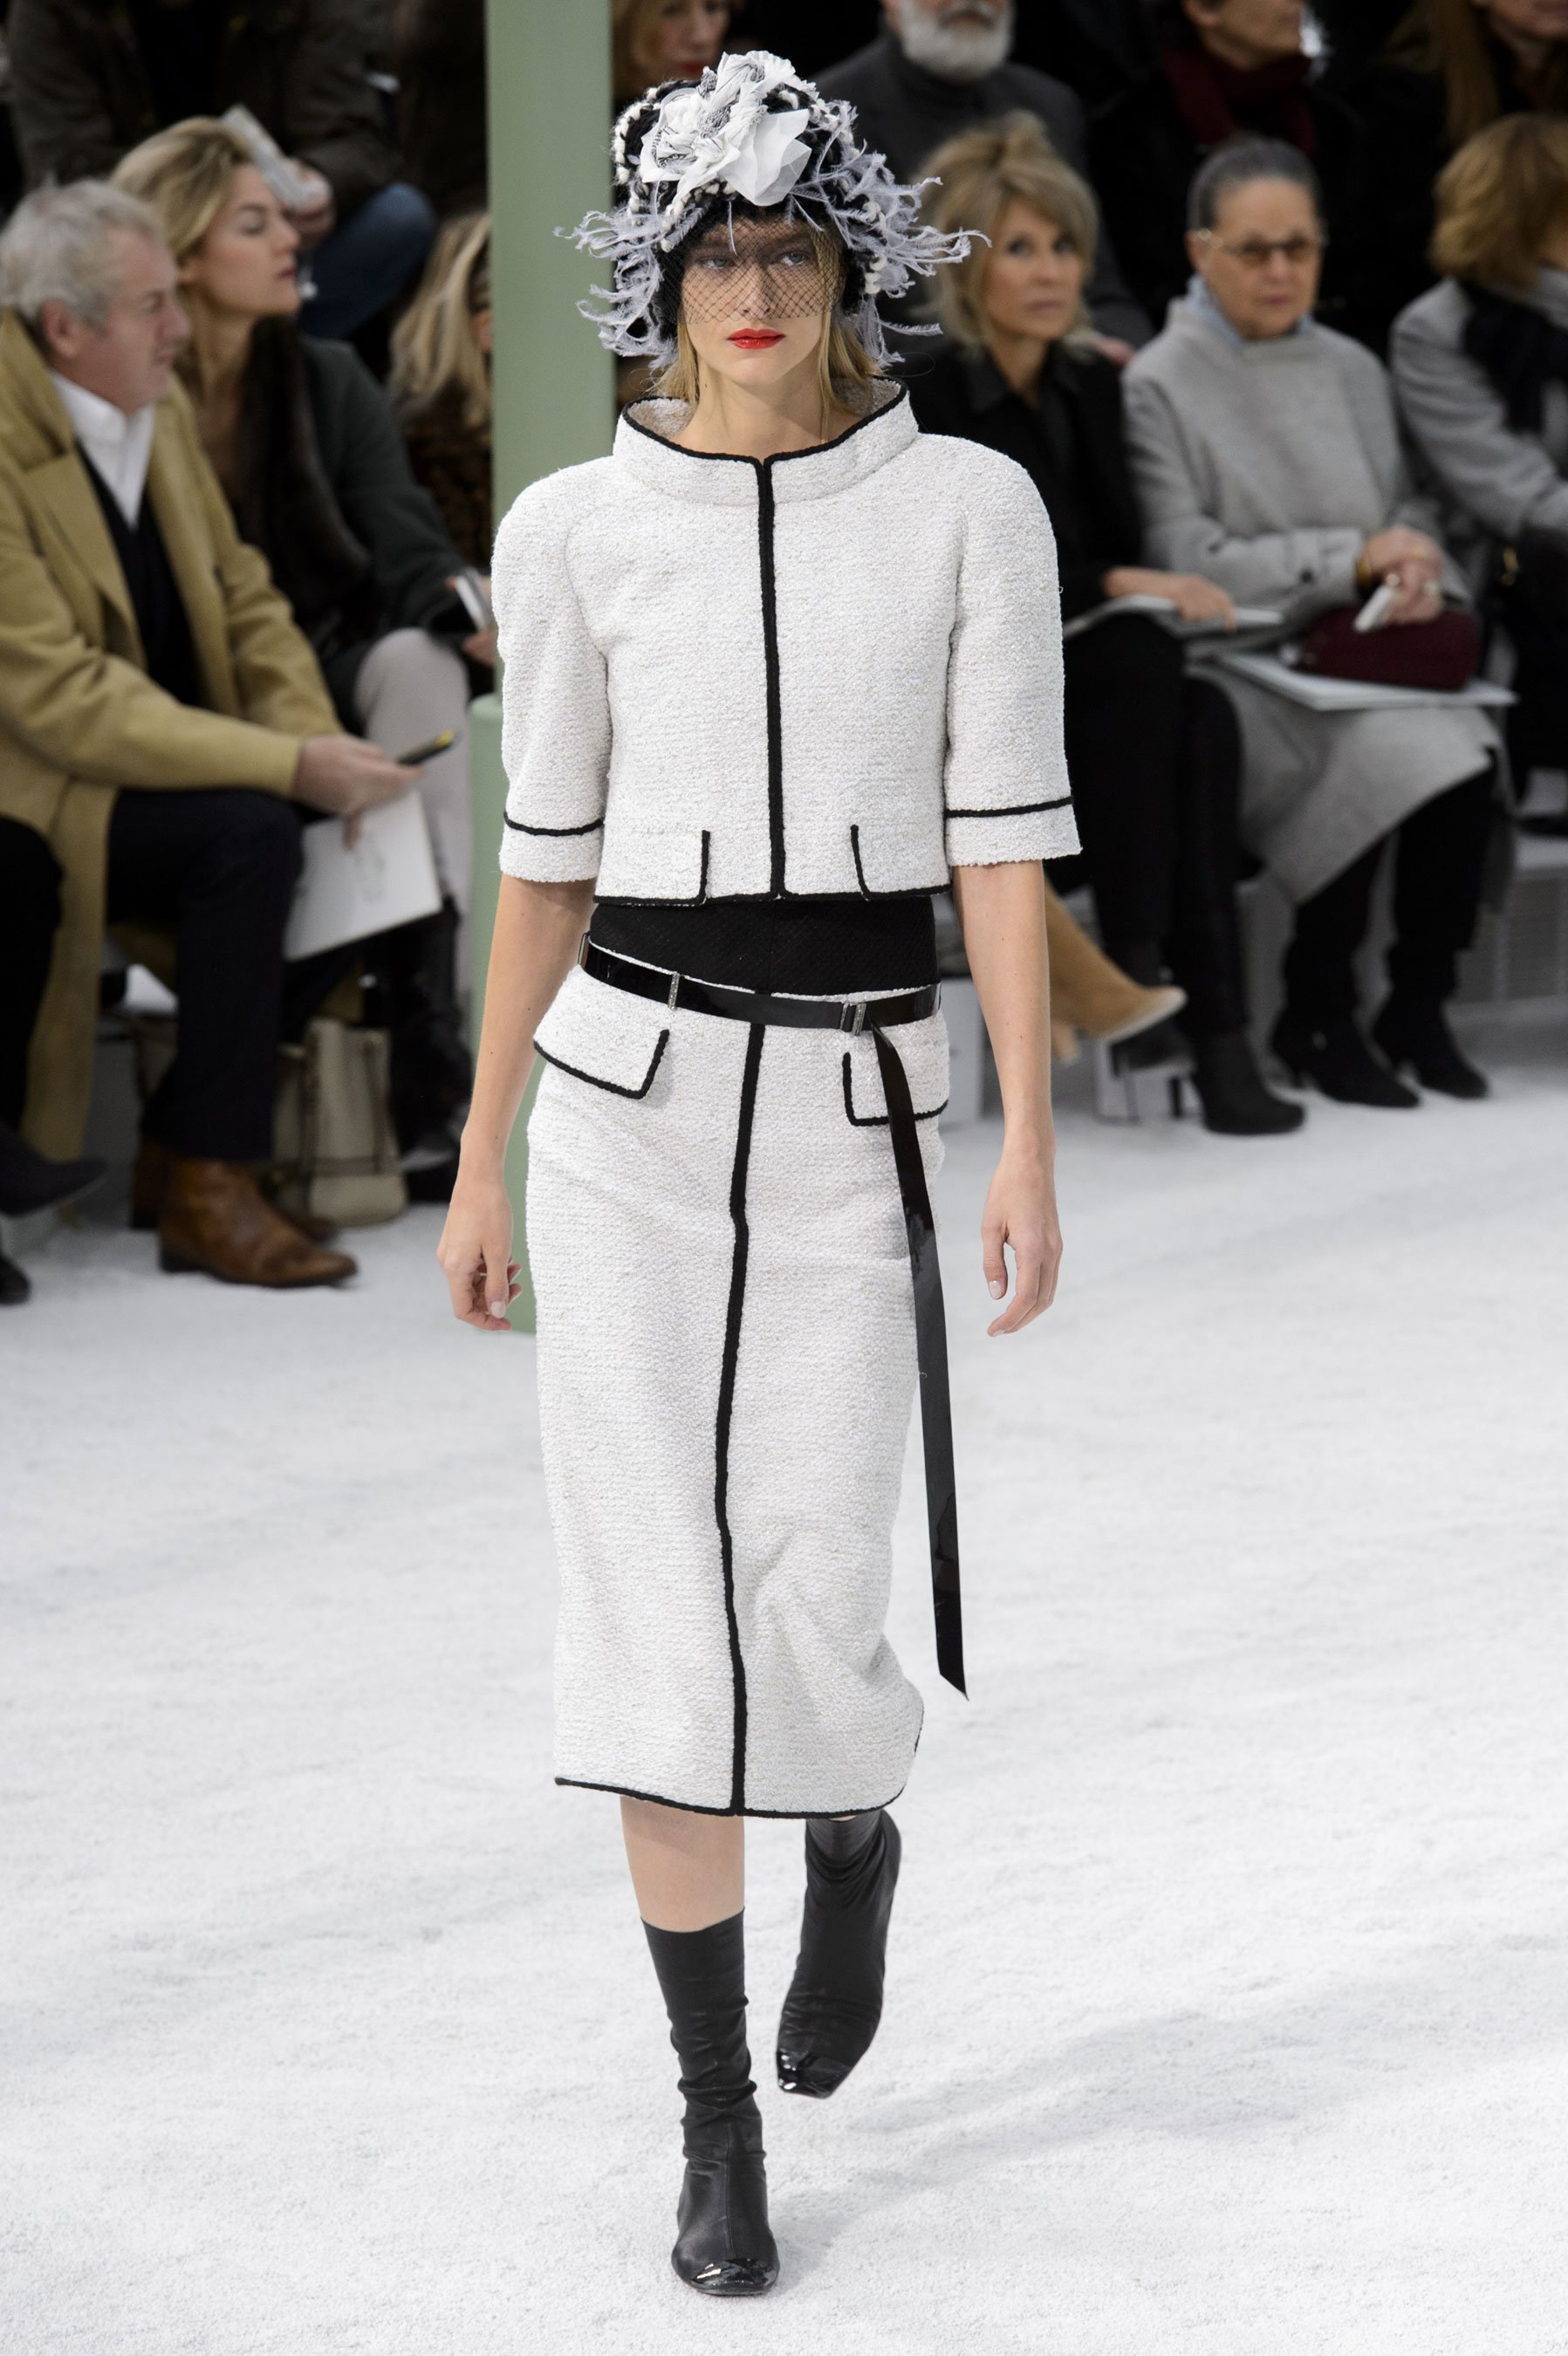 chanel haute couture spring 2015 pfw 14 nadine